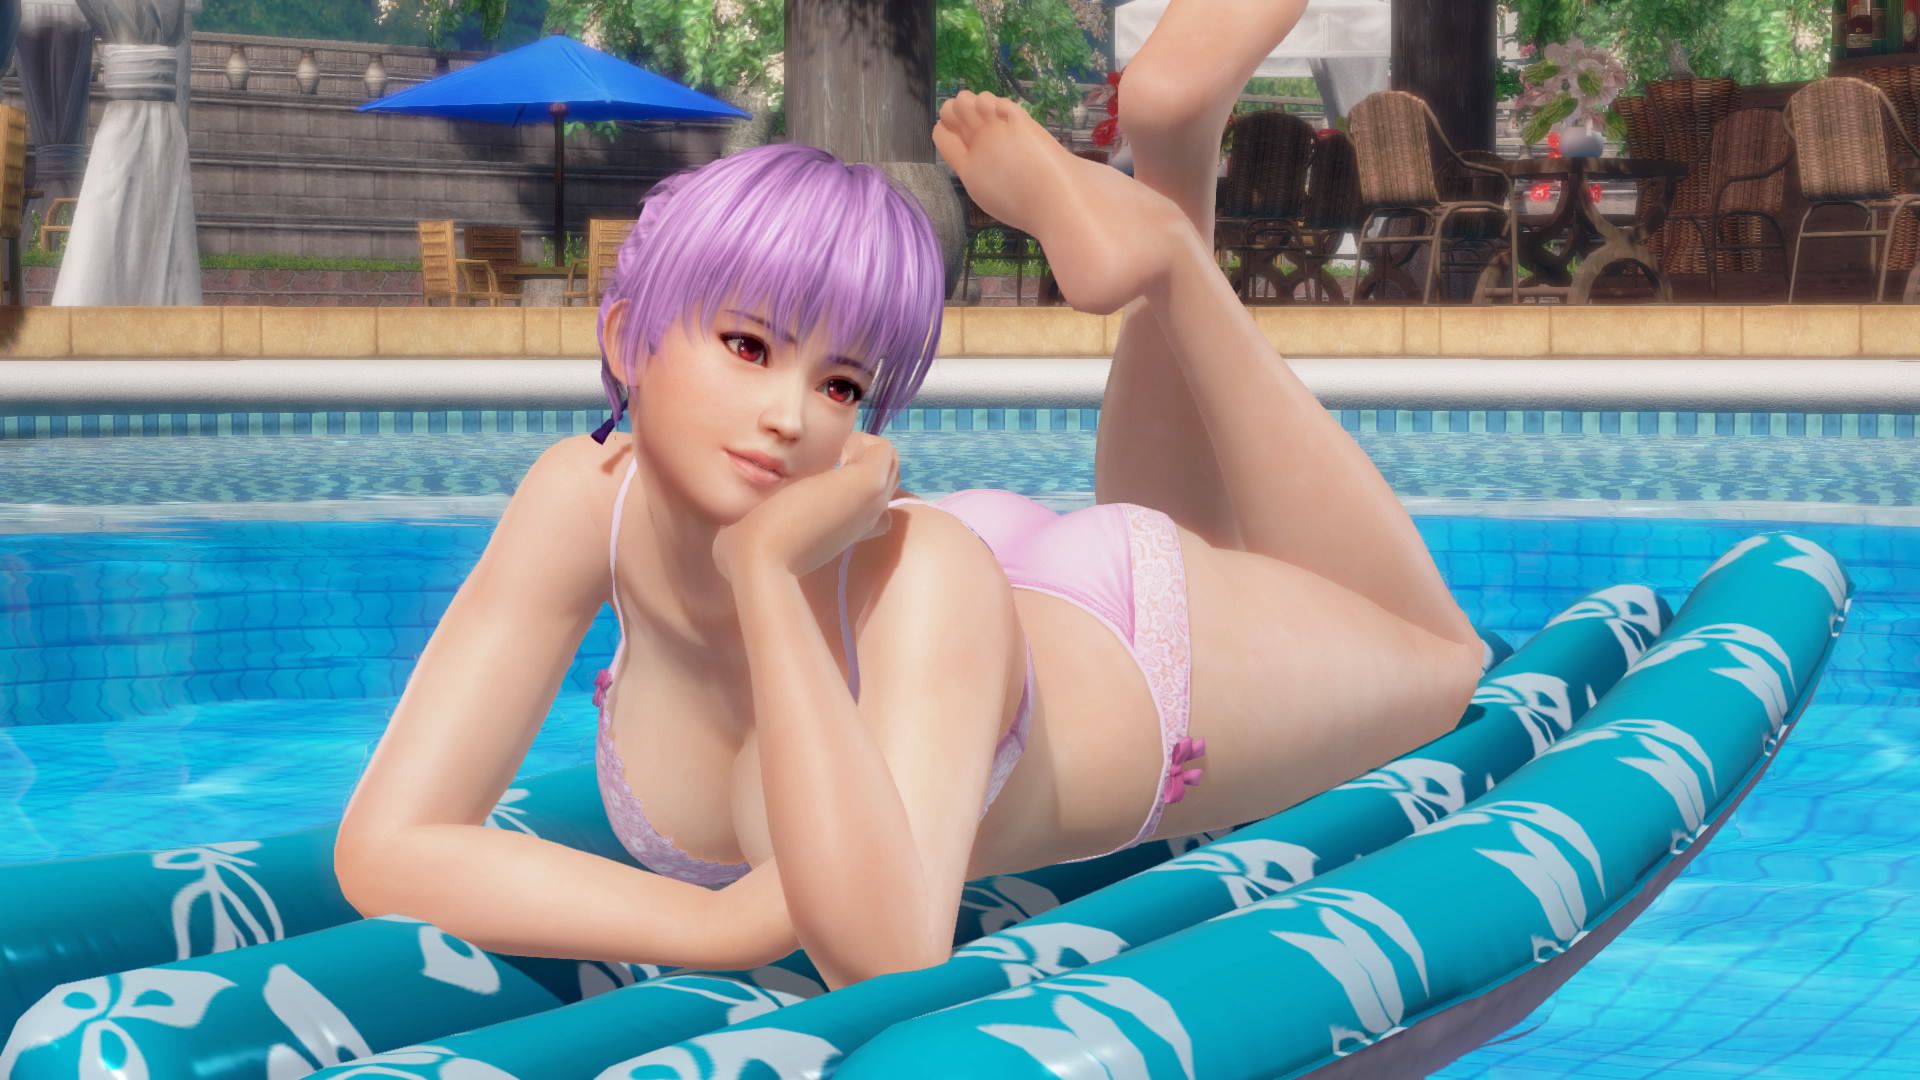 Doax3 "The color which suits the Aya-chan is pink" theory is verified 35